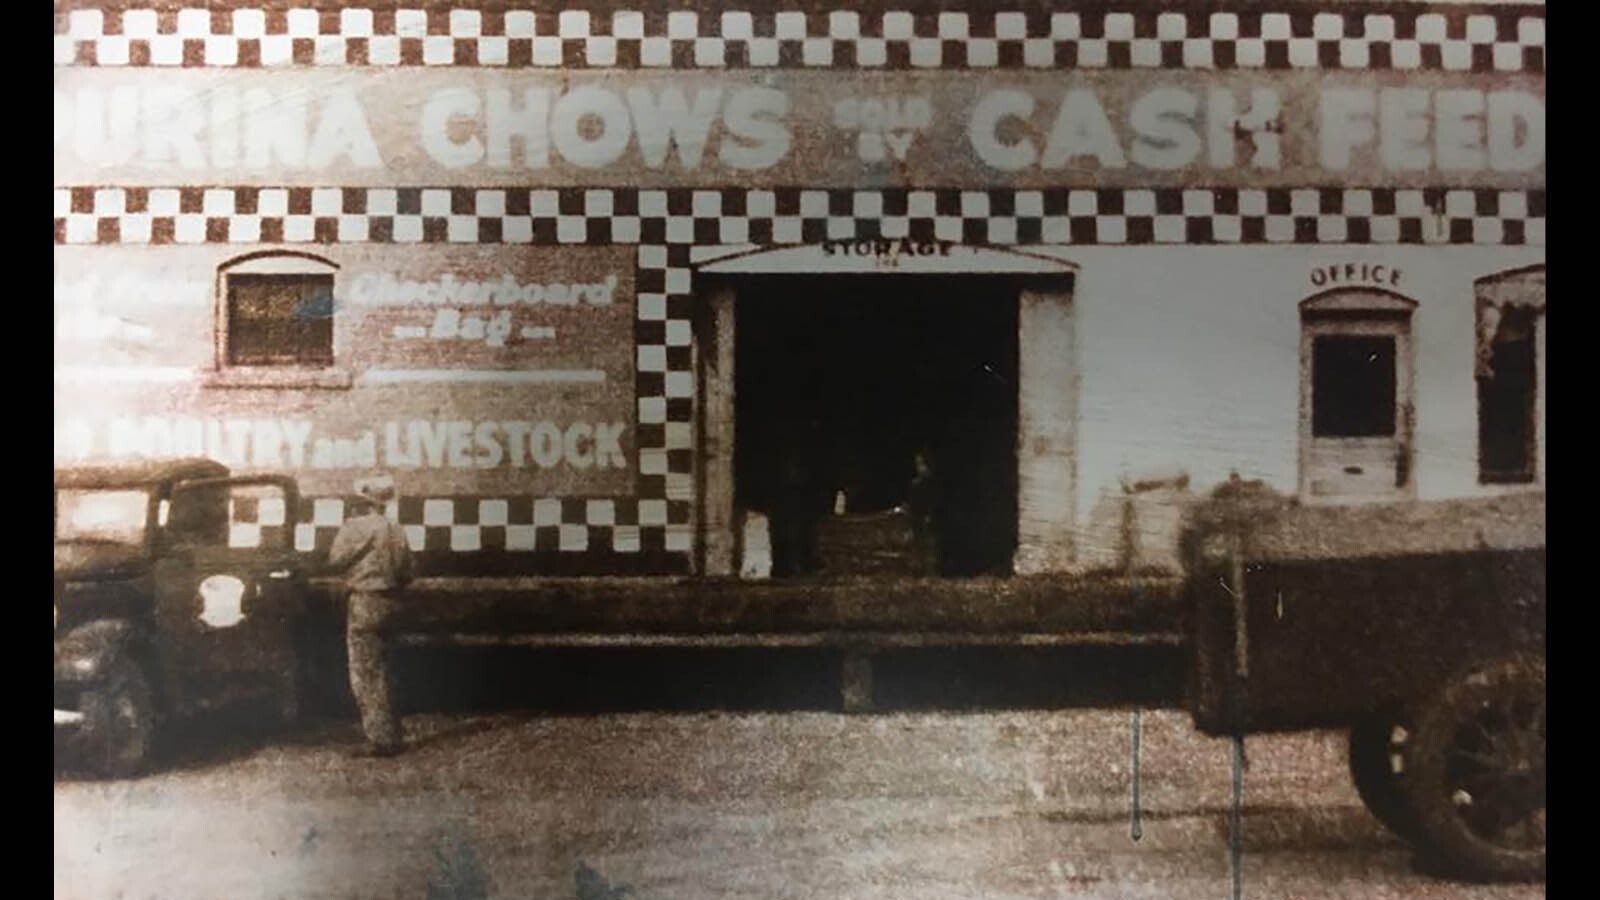 A vintage photo of Noland Feed in Casper.